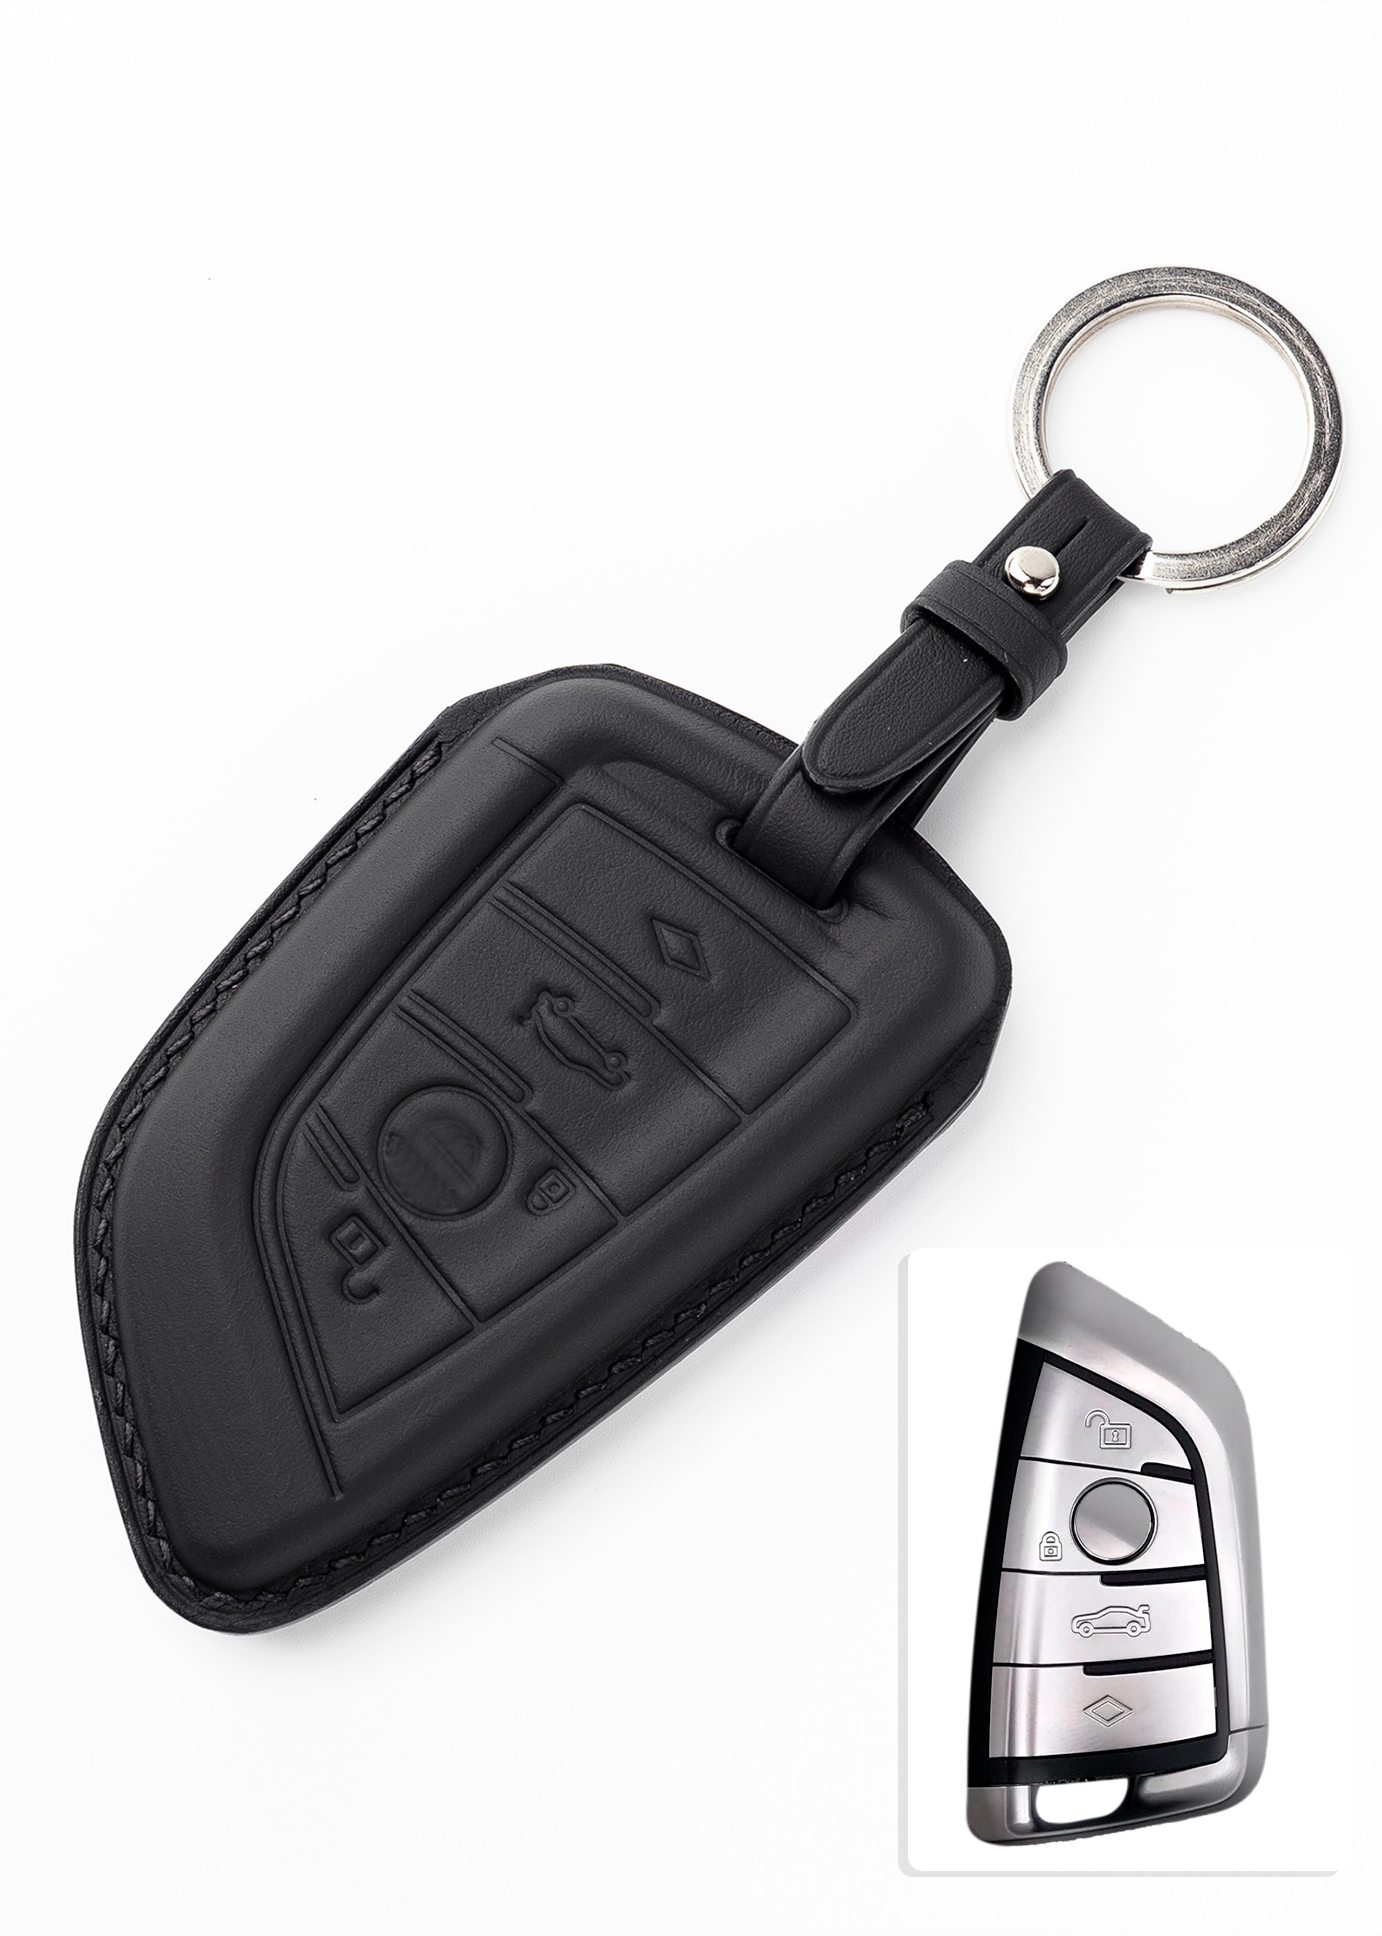 Timotheus for BMW key fob cover case, Compatible with BMW key case, Ha